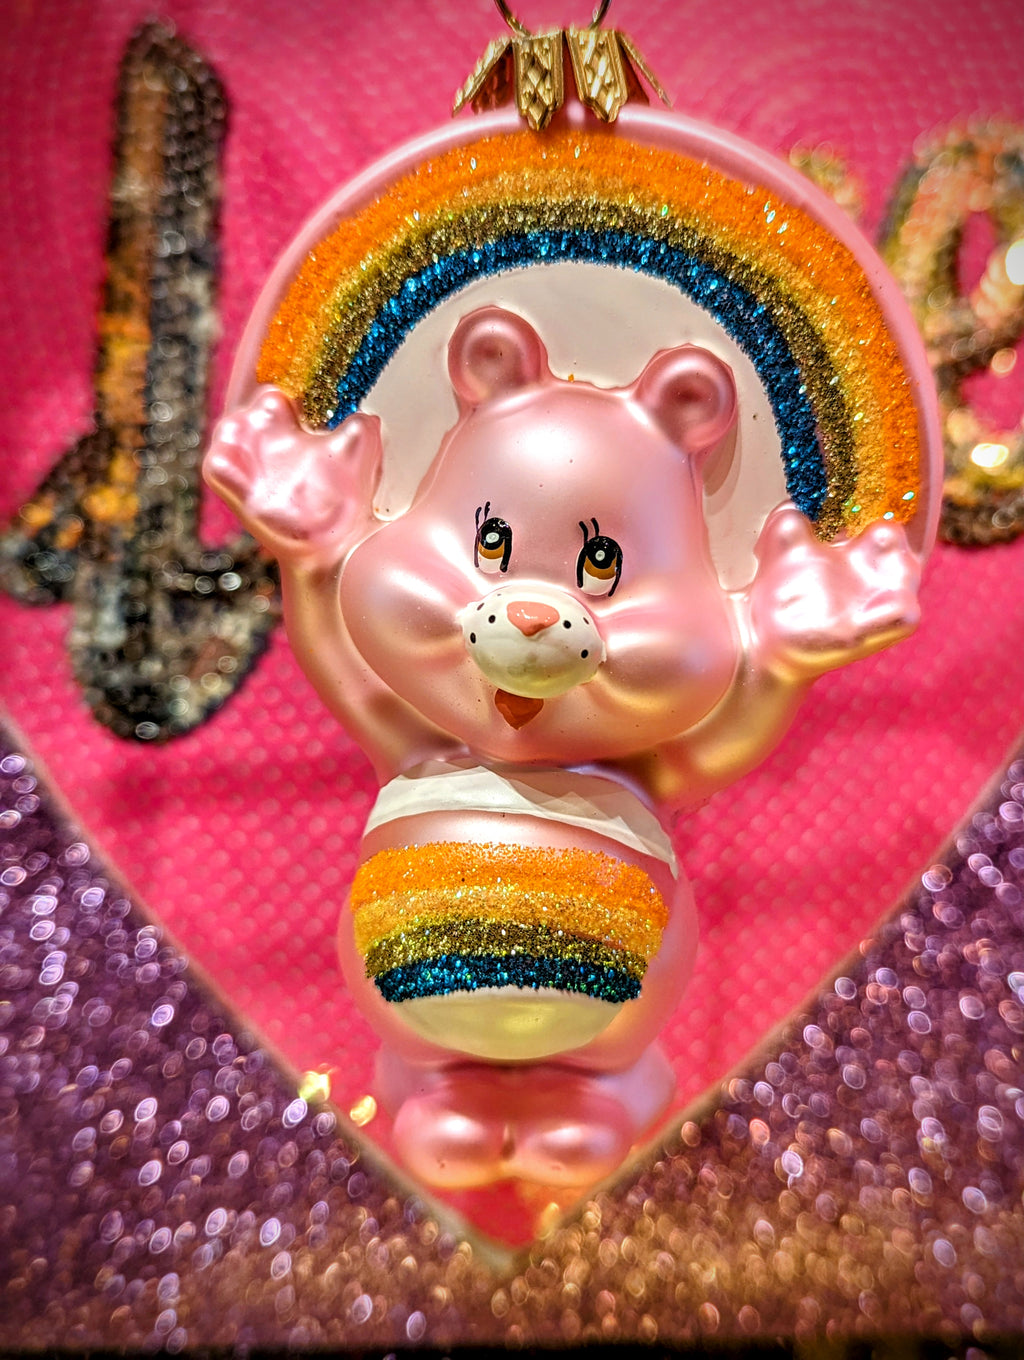 Back to the 1980's  with this rainbow dose of cute nostalgia!!, hand painted and glittered glass bauble!!

12 x 7 x 5cm

Fragile,handle with care.

 

Cody foster and co rainbow bear